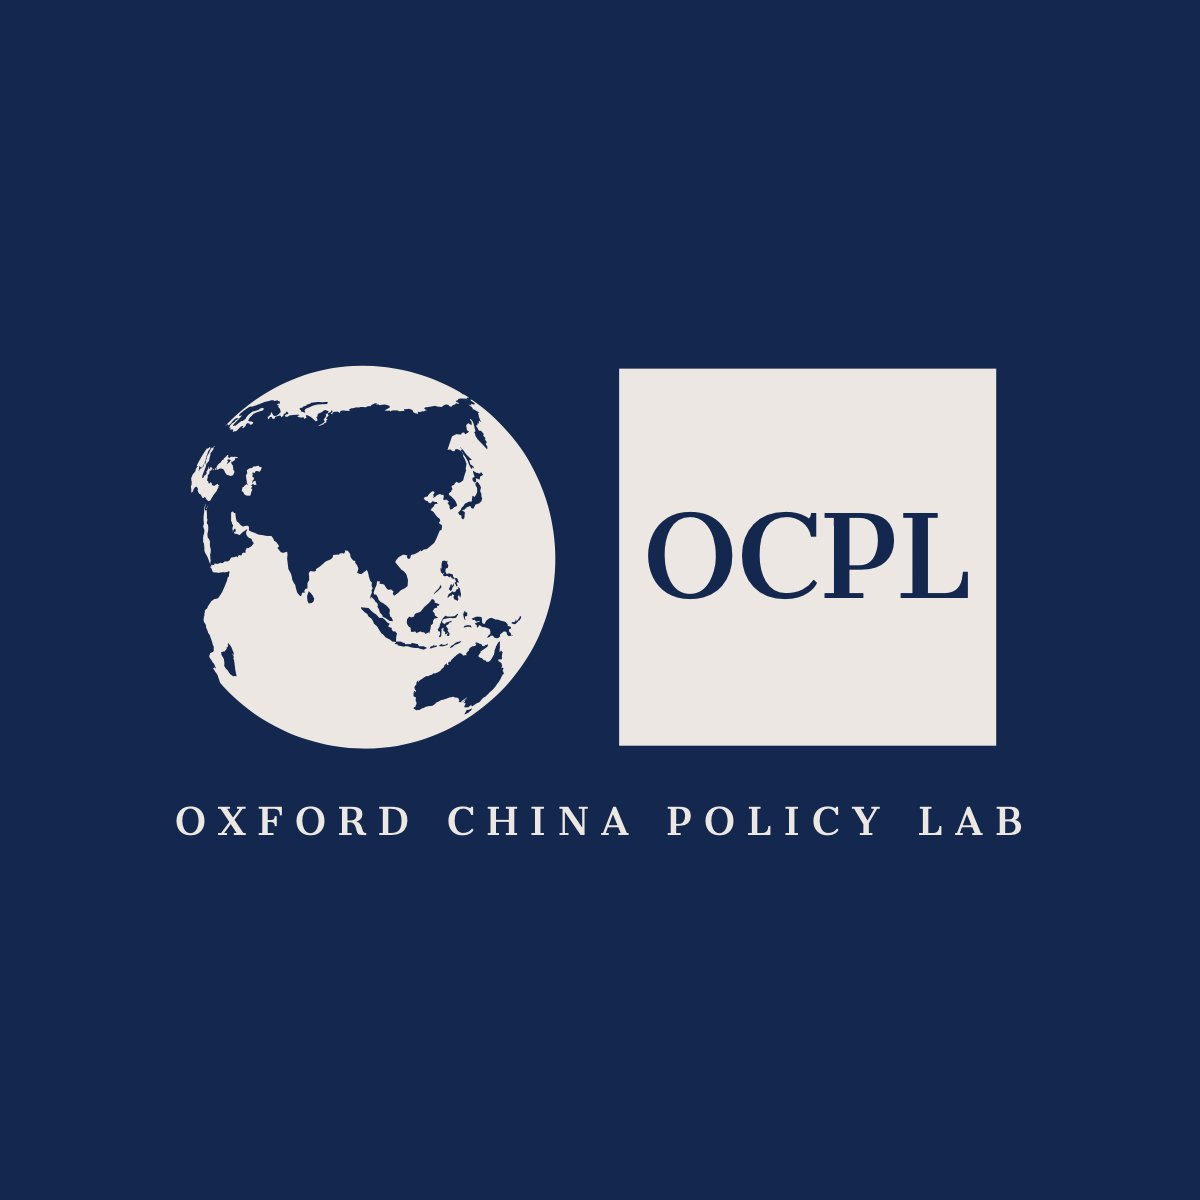 Artwork for Oxford China Policy Lab